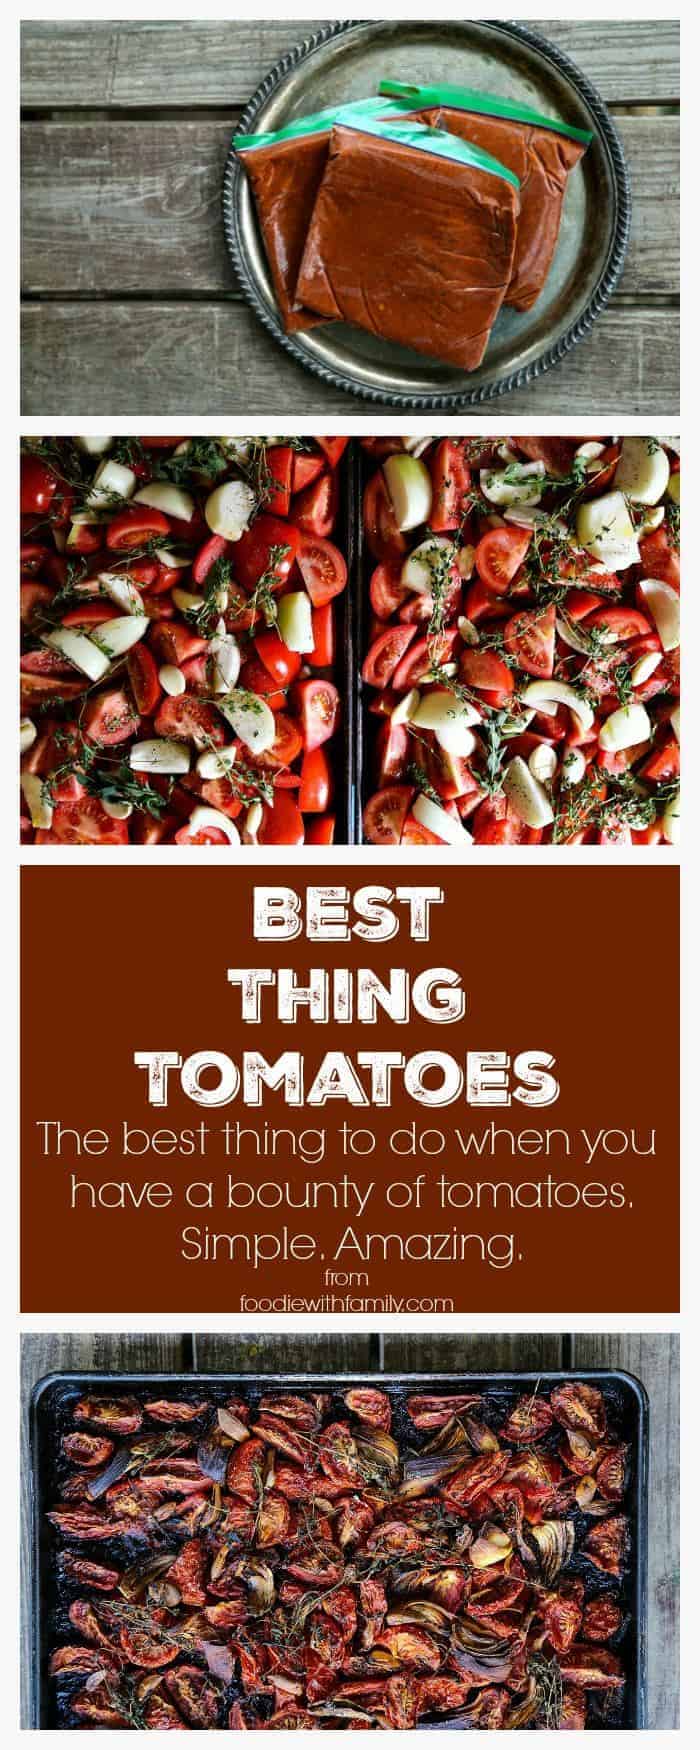 Best Thing Tomatoes. The easiest and best way to preserve tomatoes. From foodiewithfamily.com